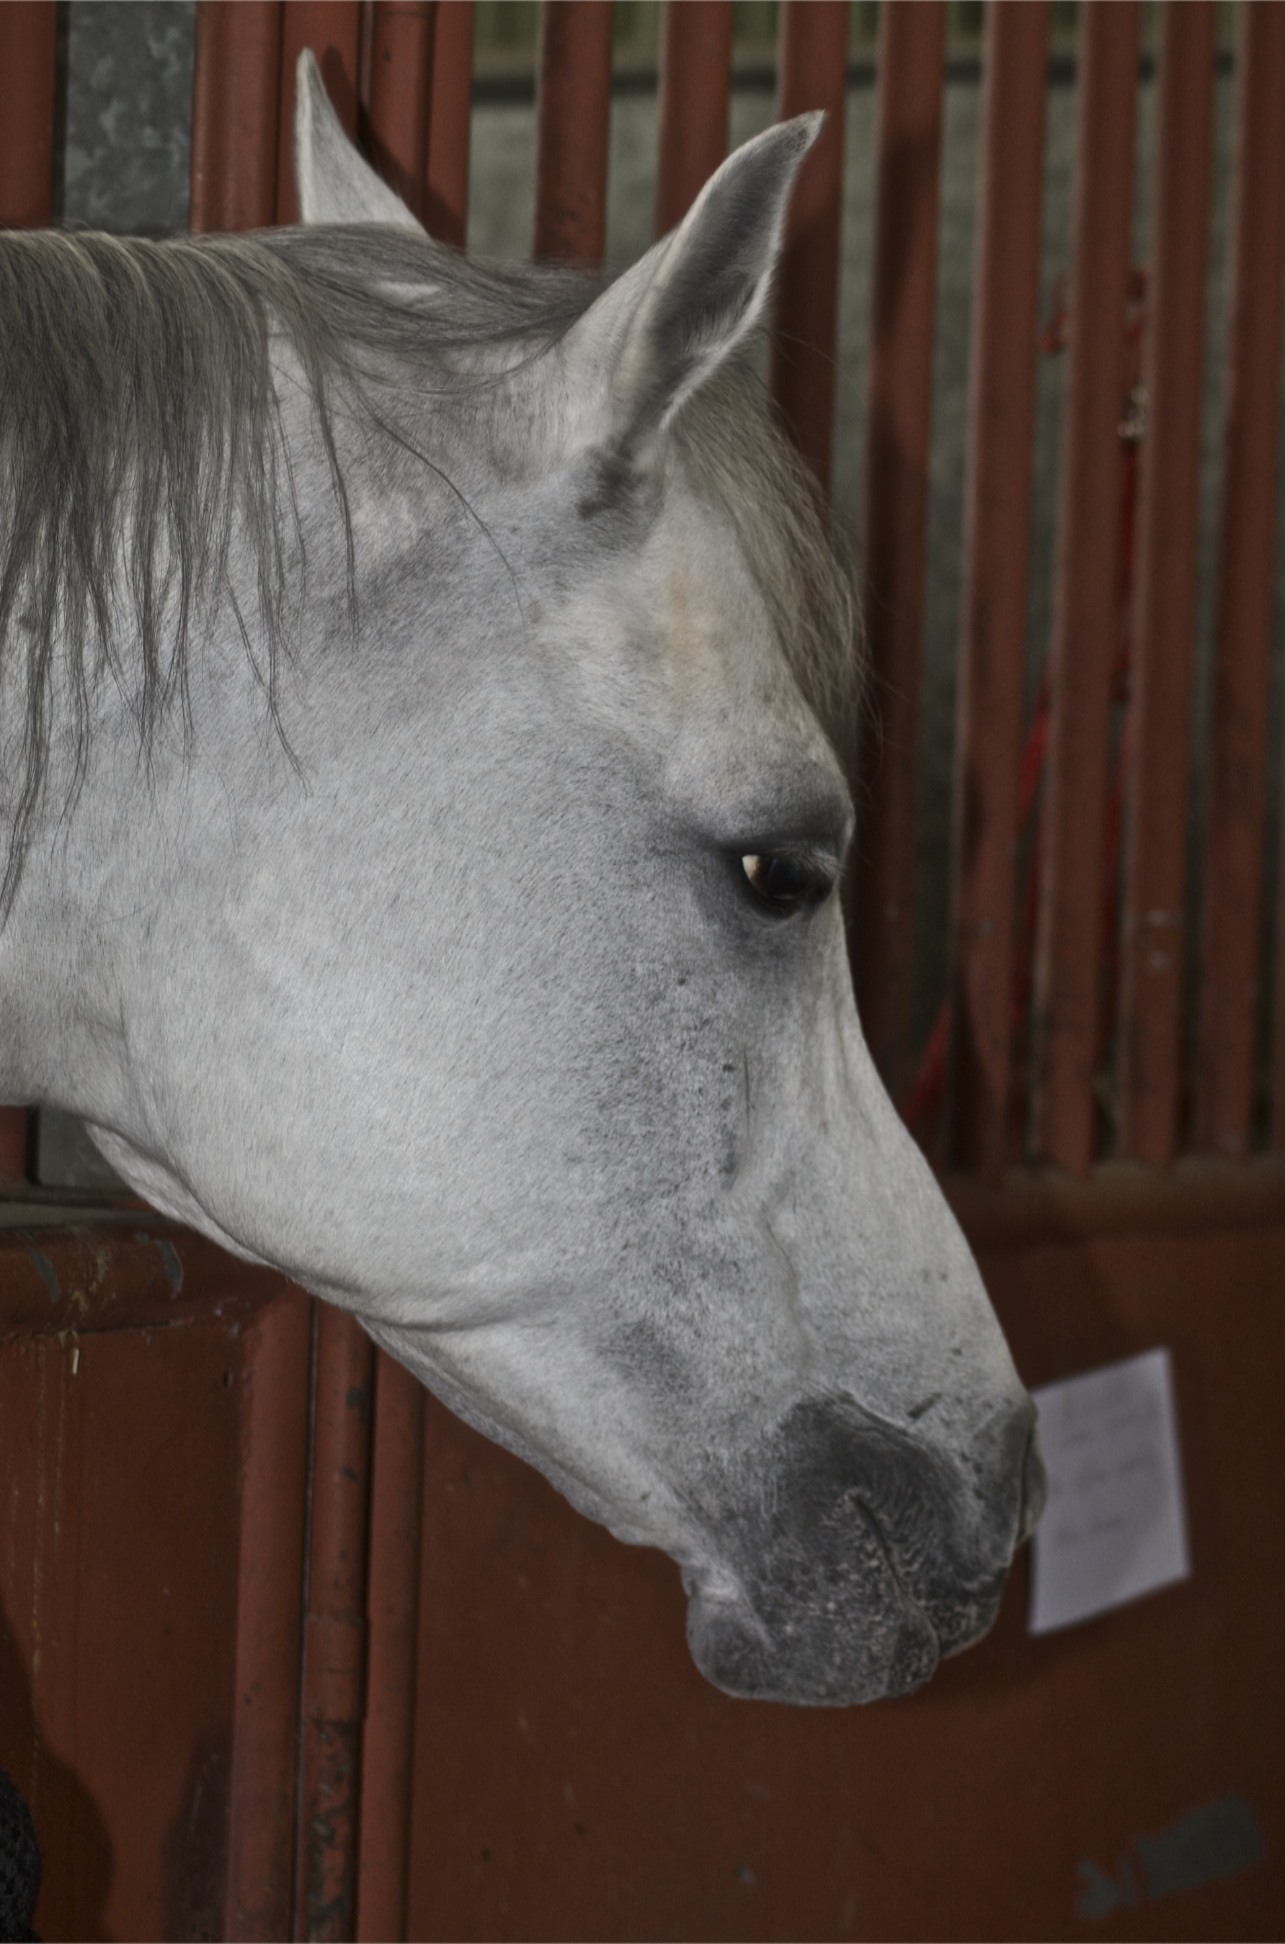 a close up view of a horse with its head and ears facing away from the camera